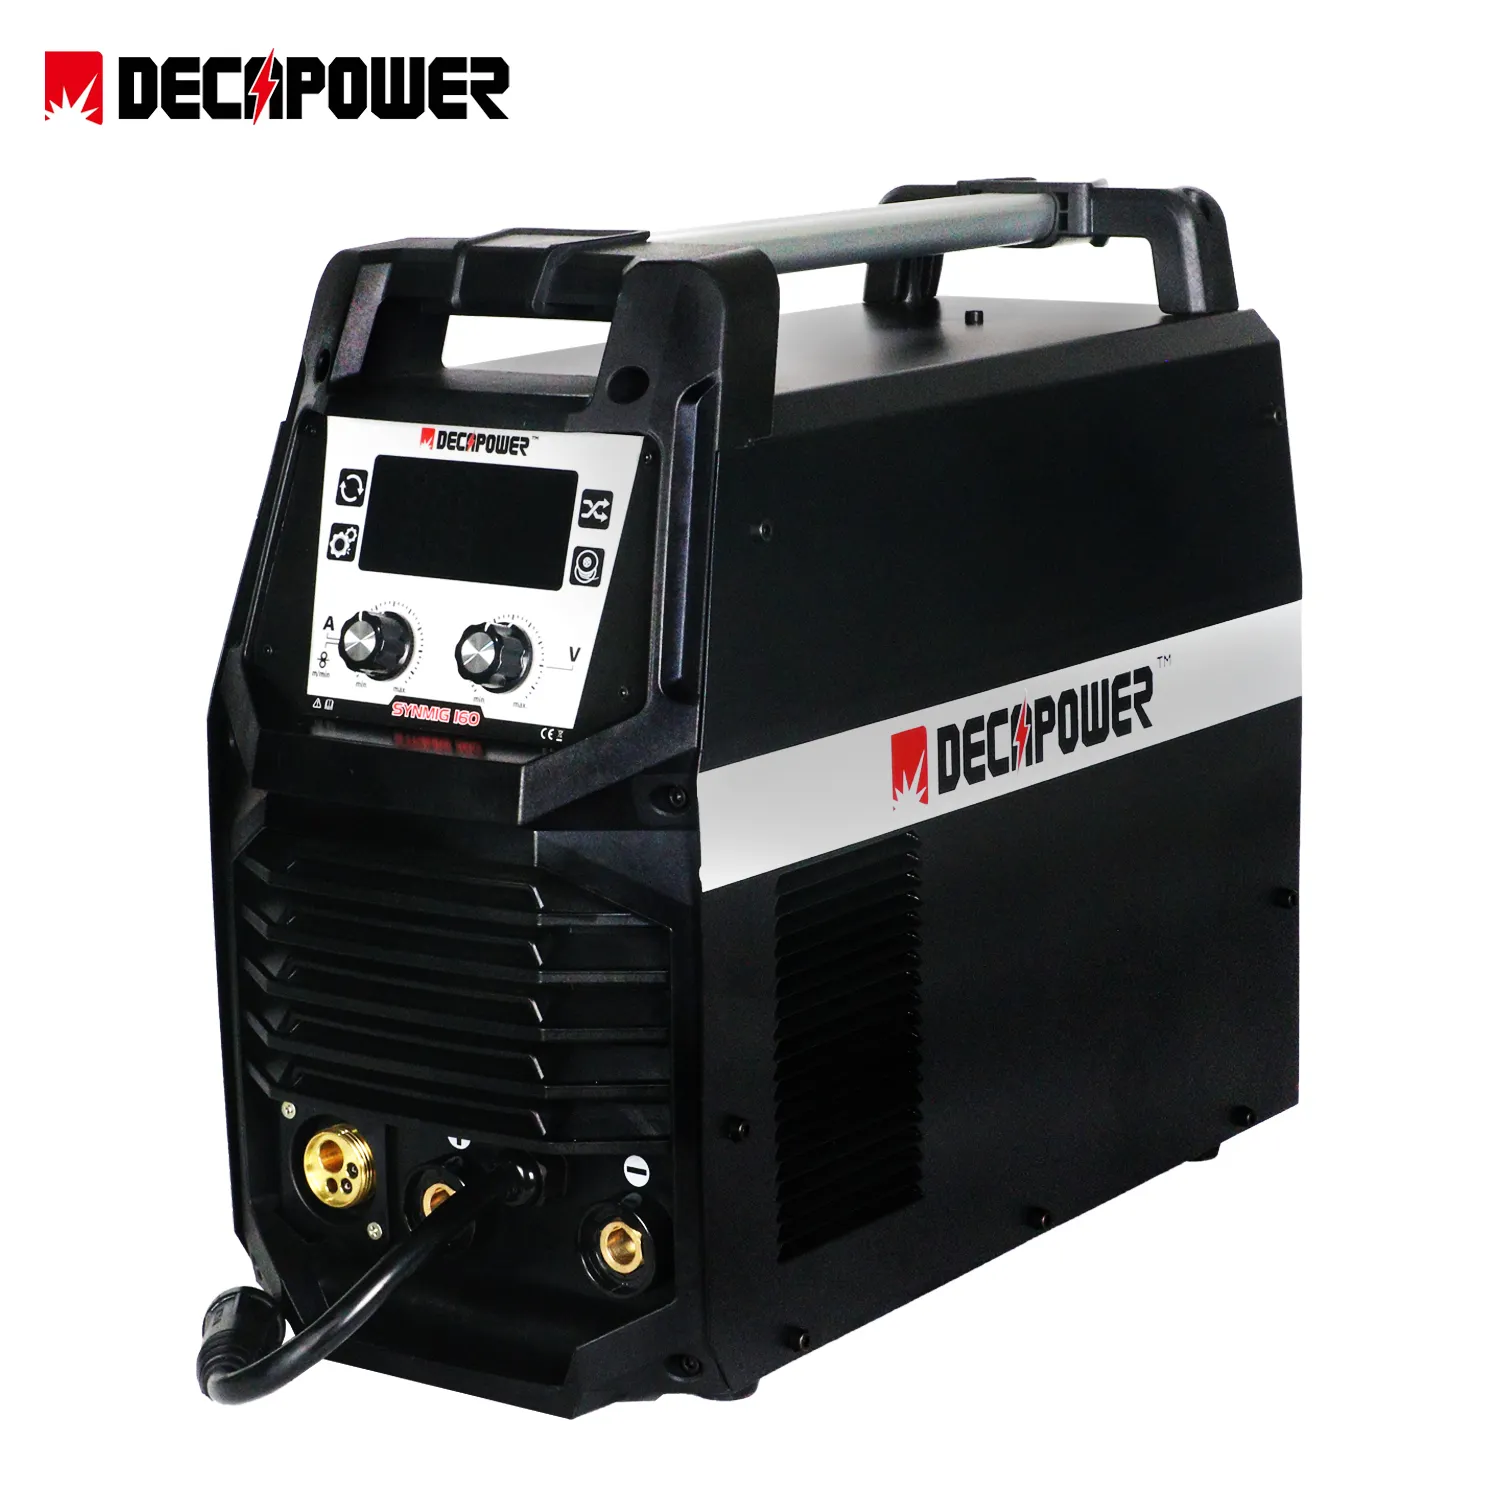 Decapower Synerg Mig Co2 Welding Machine Gas Gasless MMA TIG MAG MIG Welders For Aluminum / Ss Welding